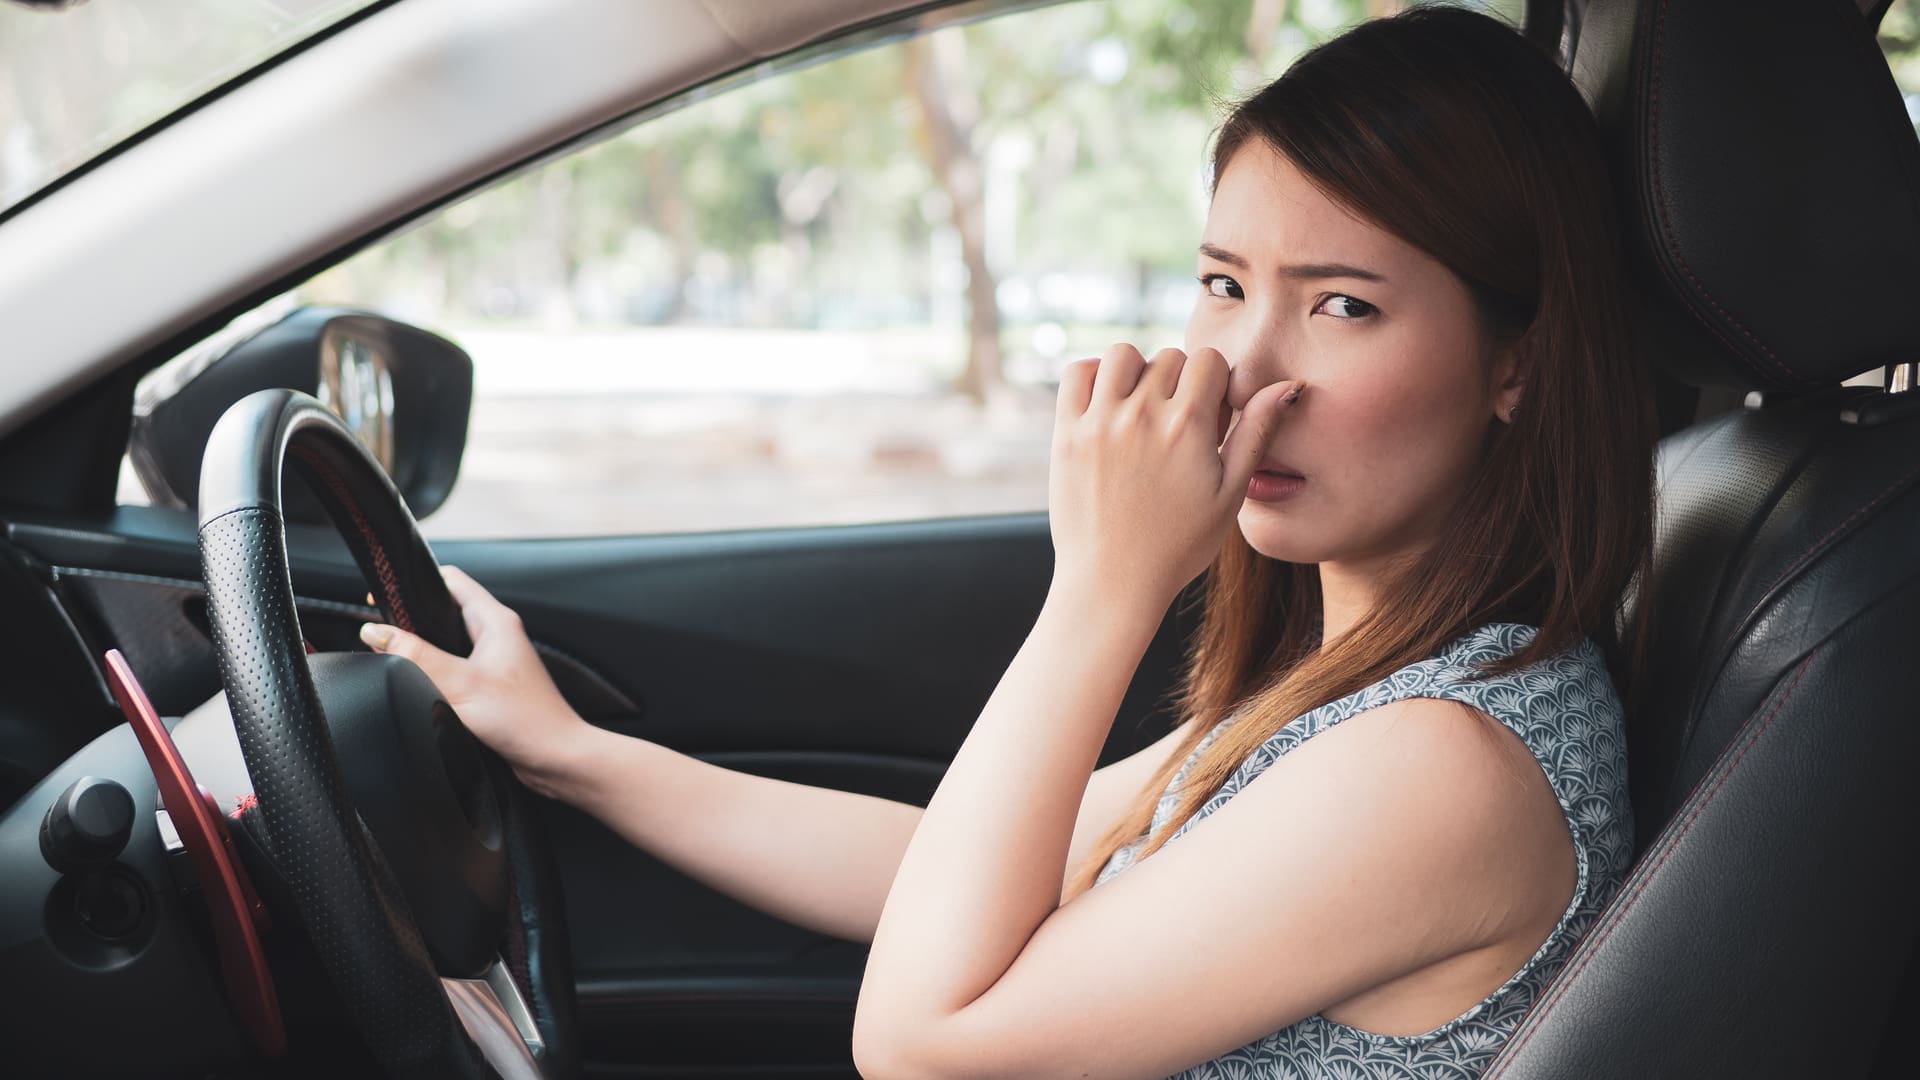 A woman sitting in a car, covering her nose, visibly uncomfortable due to a bad odor inside the vehicle.